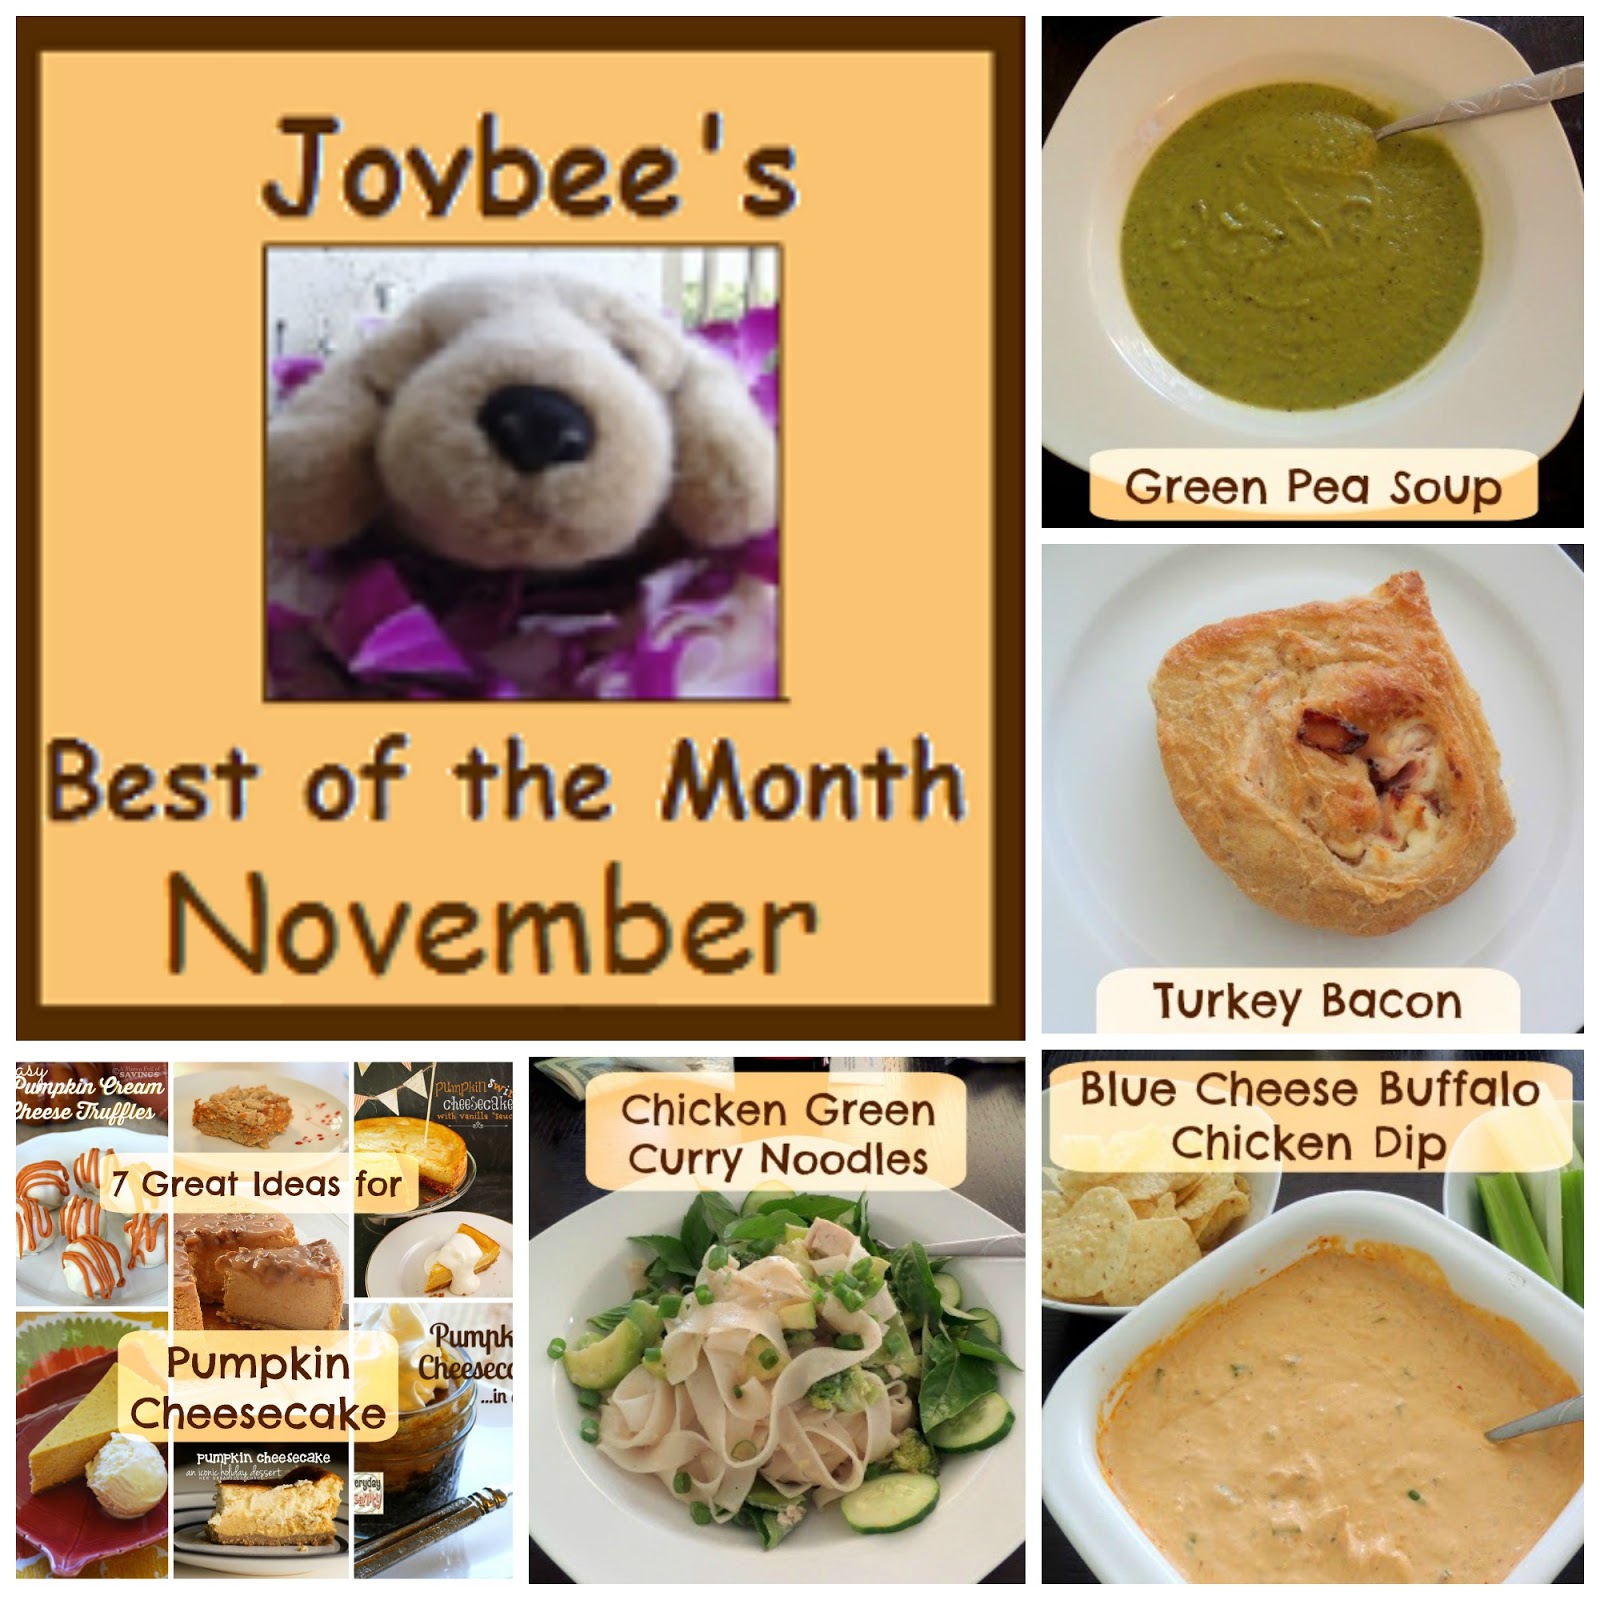 Best of the Month November 2014